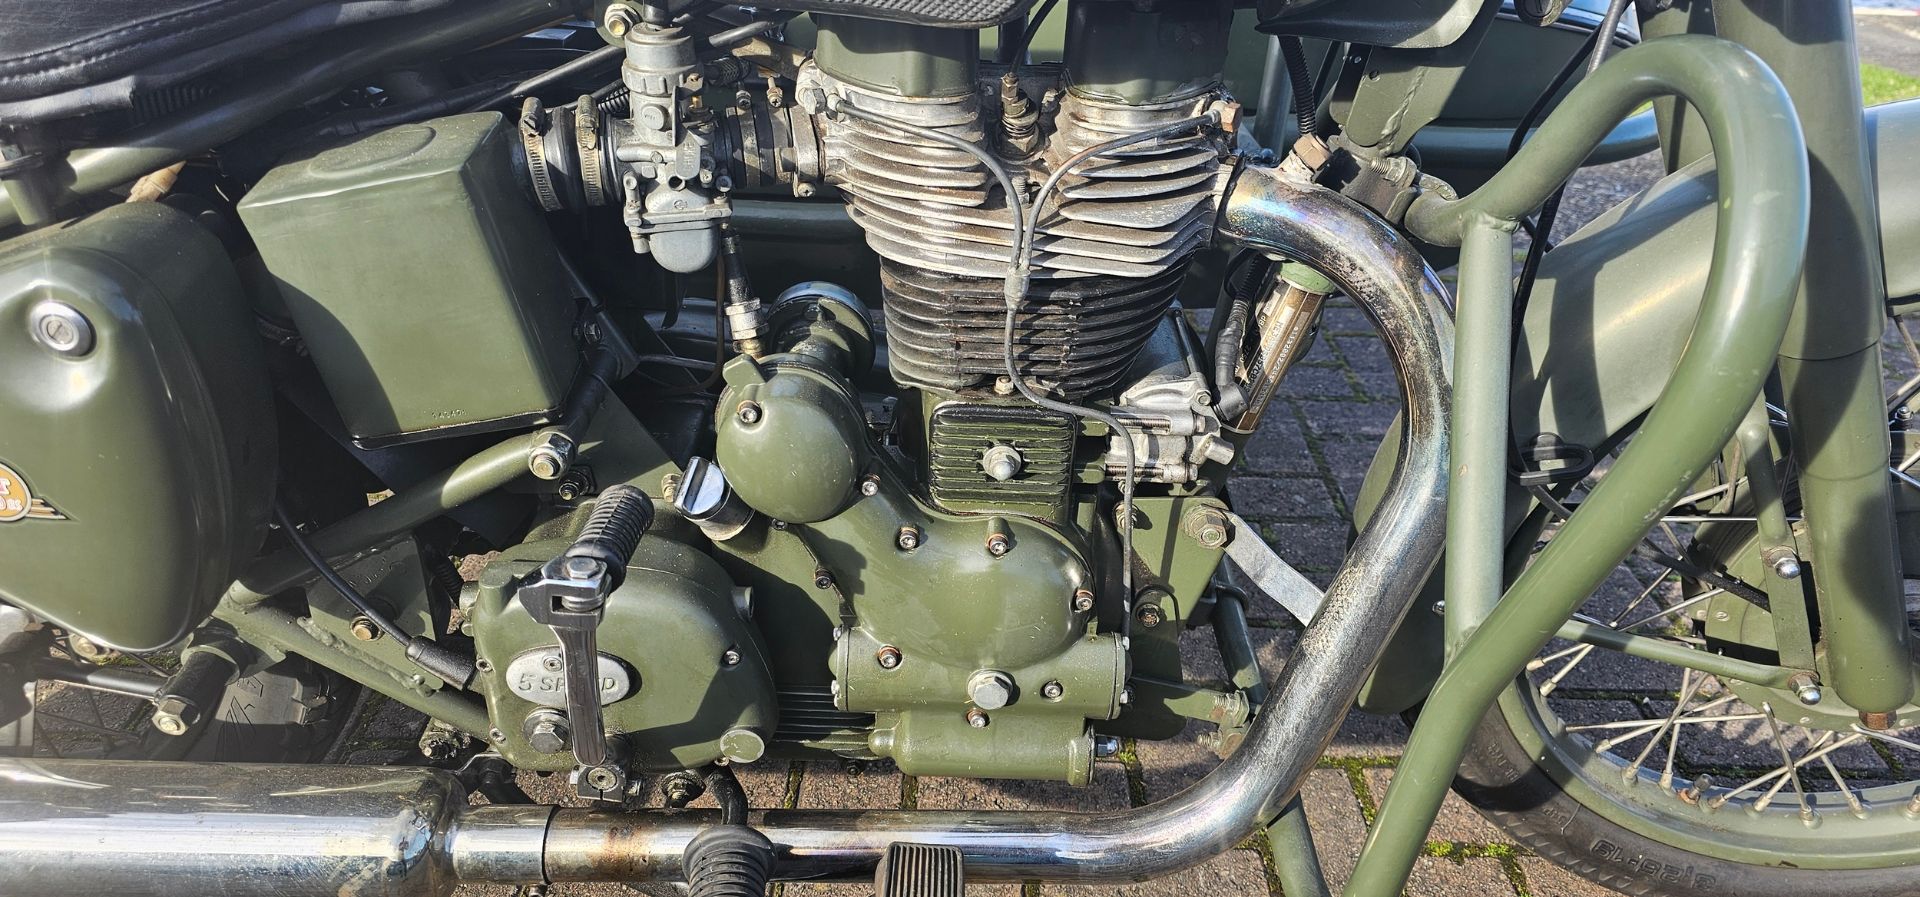 1937 Norton WD16H New Zealand Army, 490cc. Registration number TXS 655 (non transferrable). Frame - Image 9 of 19